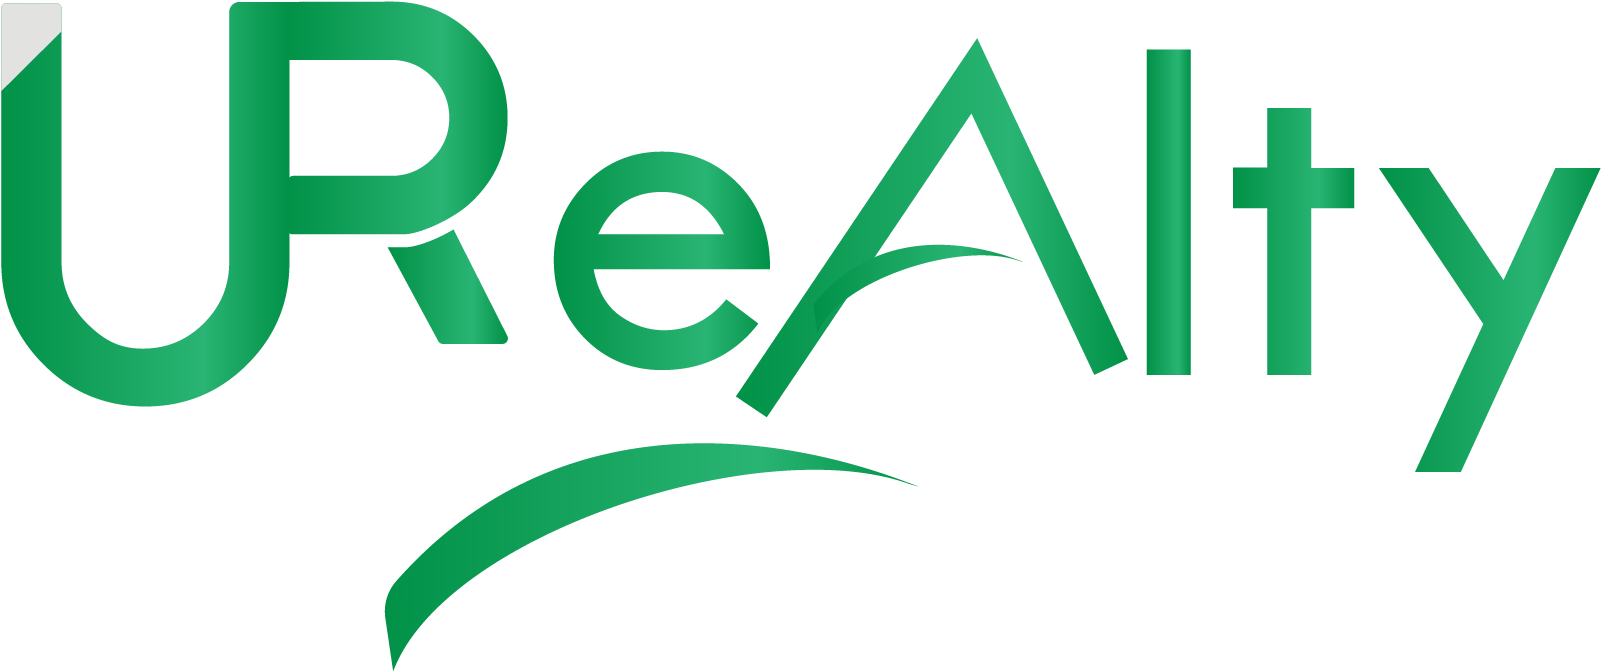 Update Realty - Real Property (2392x713), Png Download